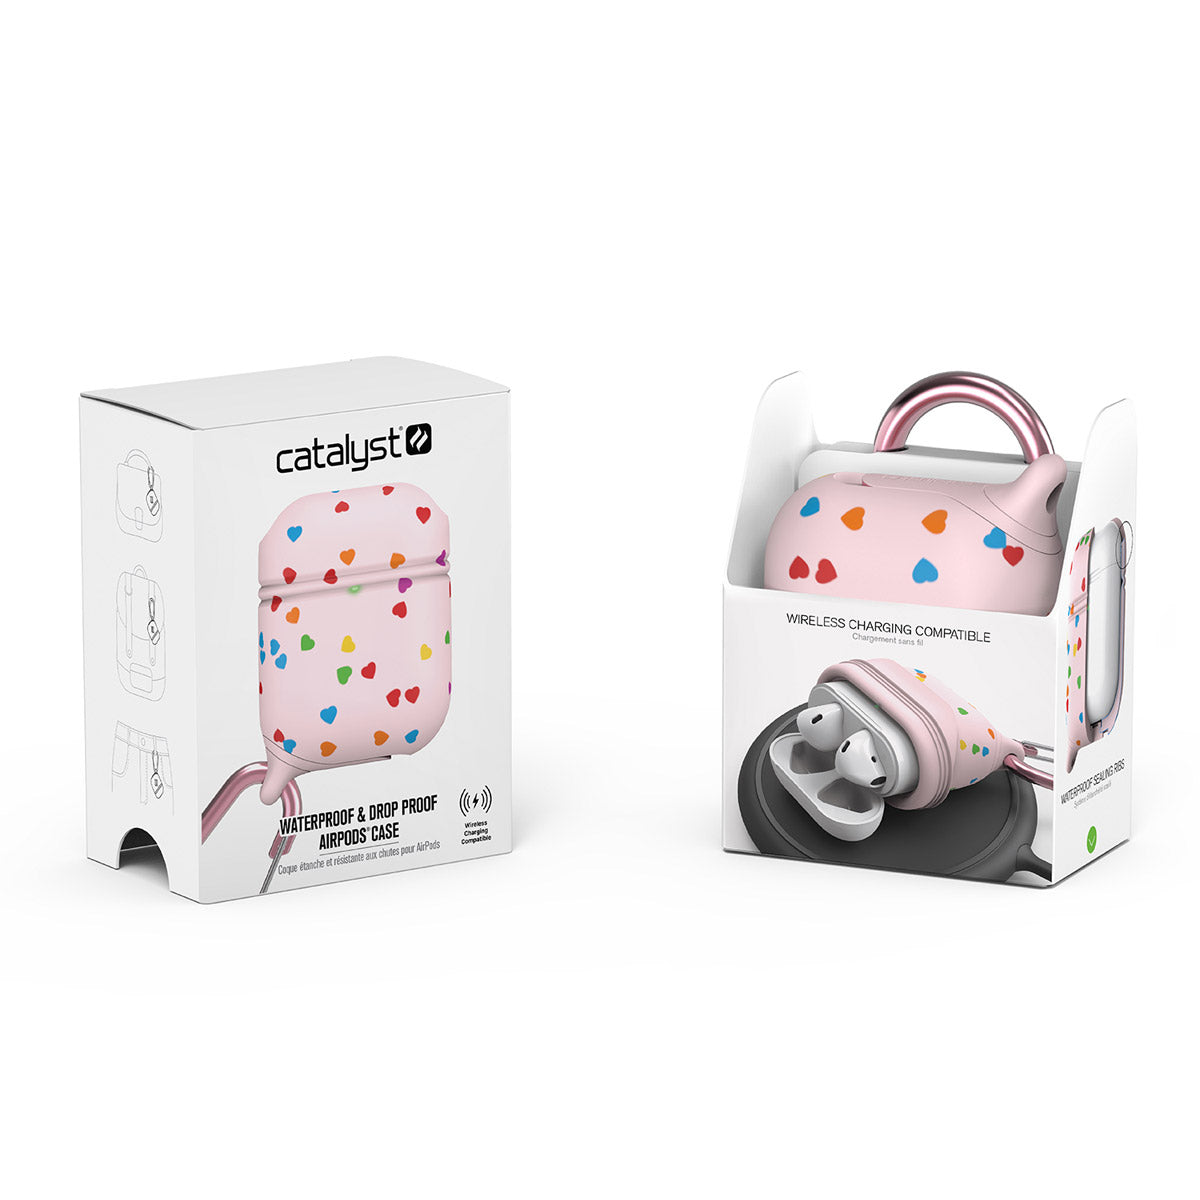 Catalyst Waterproof Case for Airpods Gen 1 & 2 special edition + carabiner showing the back and front of  the packaging